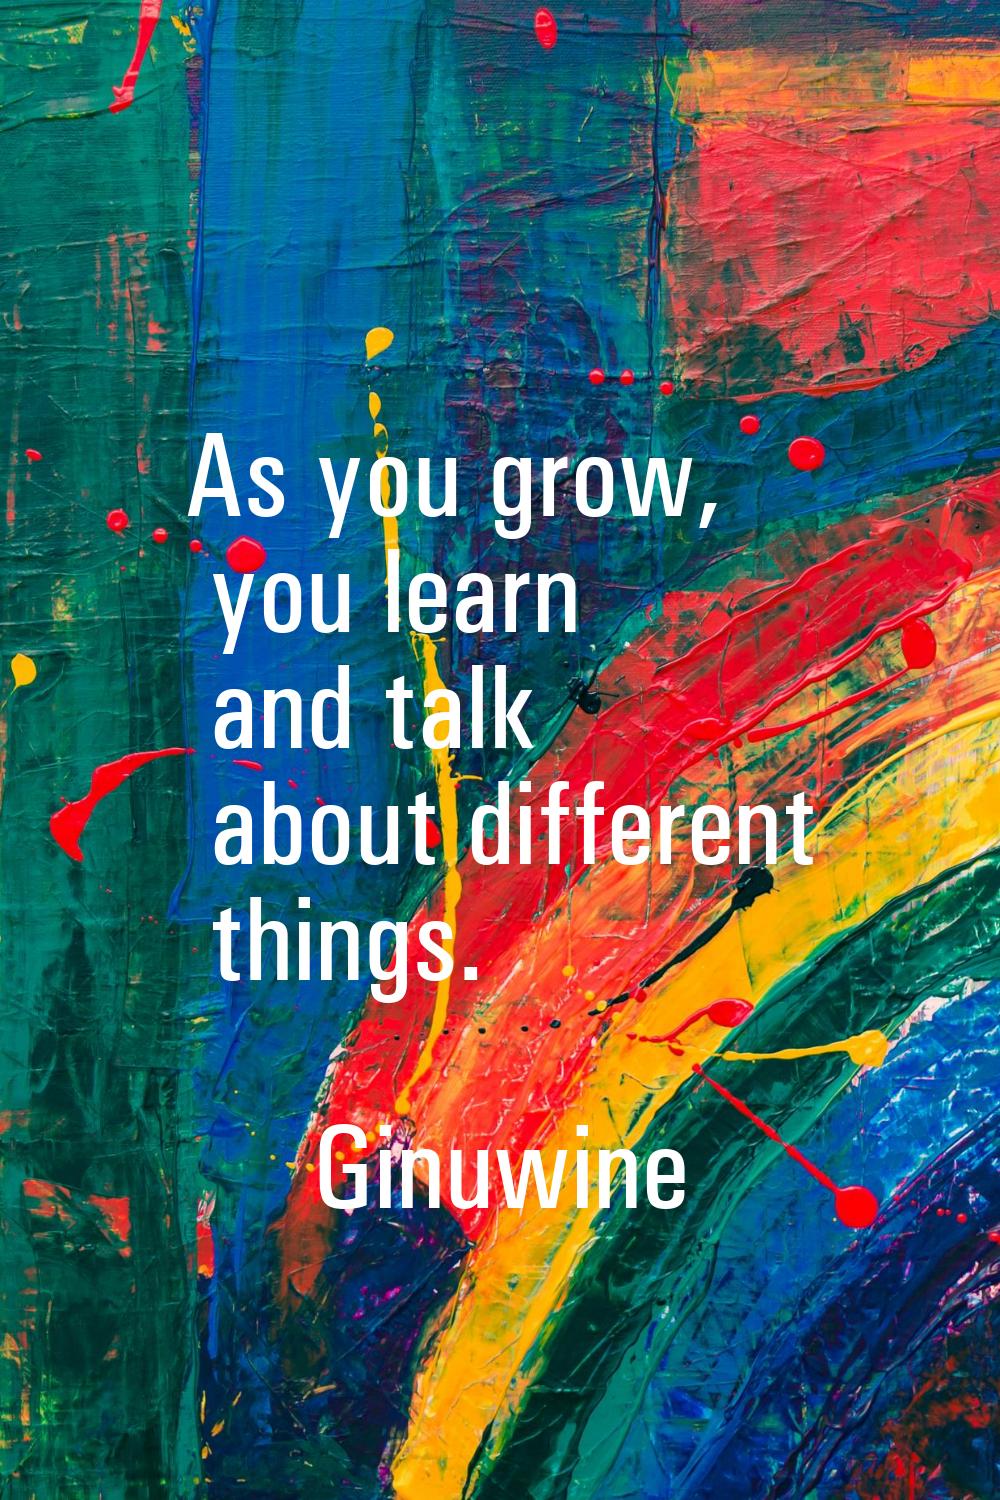 As you grow, you learn and talk about different things.